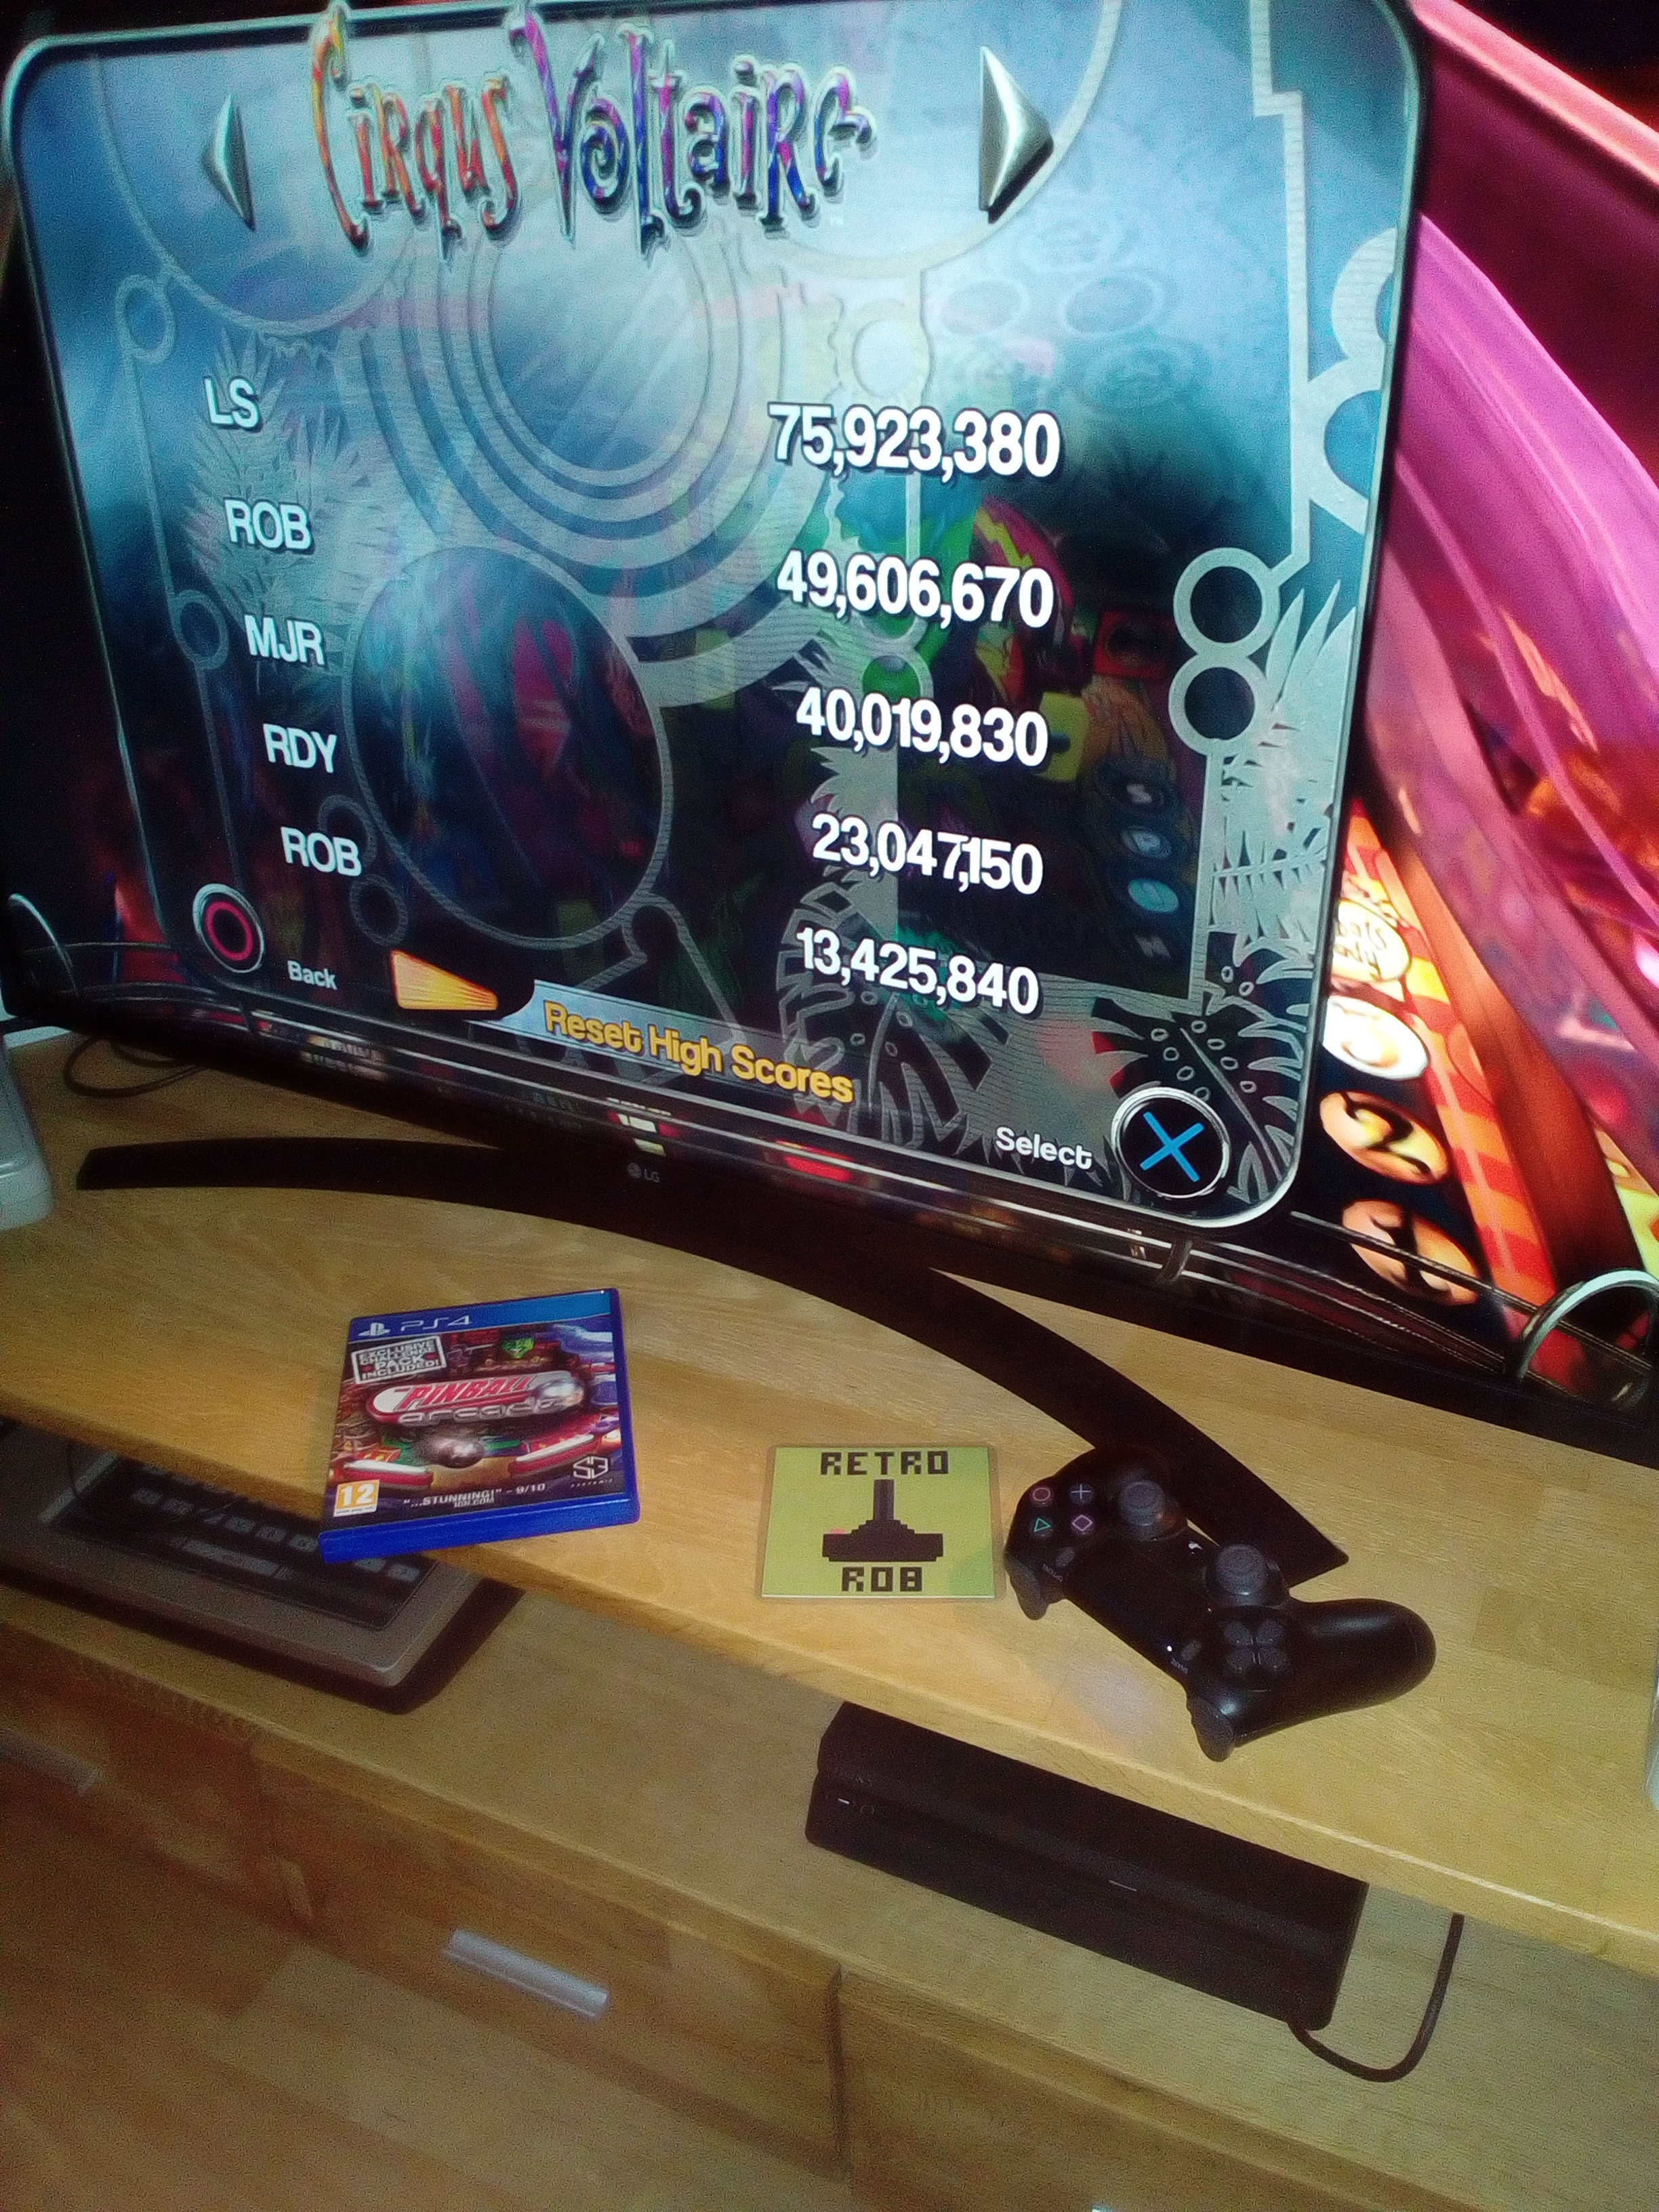 RetroRob: Pinball Arcade: Circus Voltaire (Playstation 4) 49,606,670 points on 2020-12-31 04:24:12